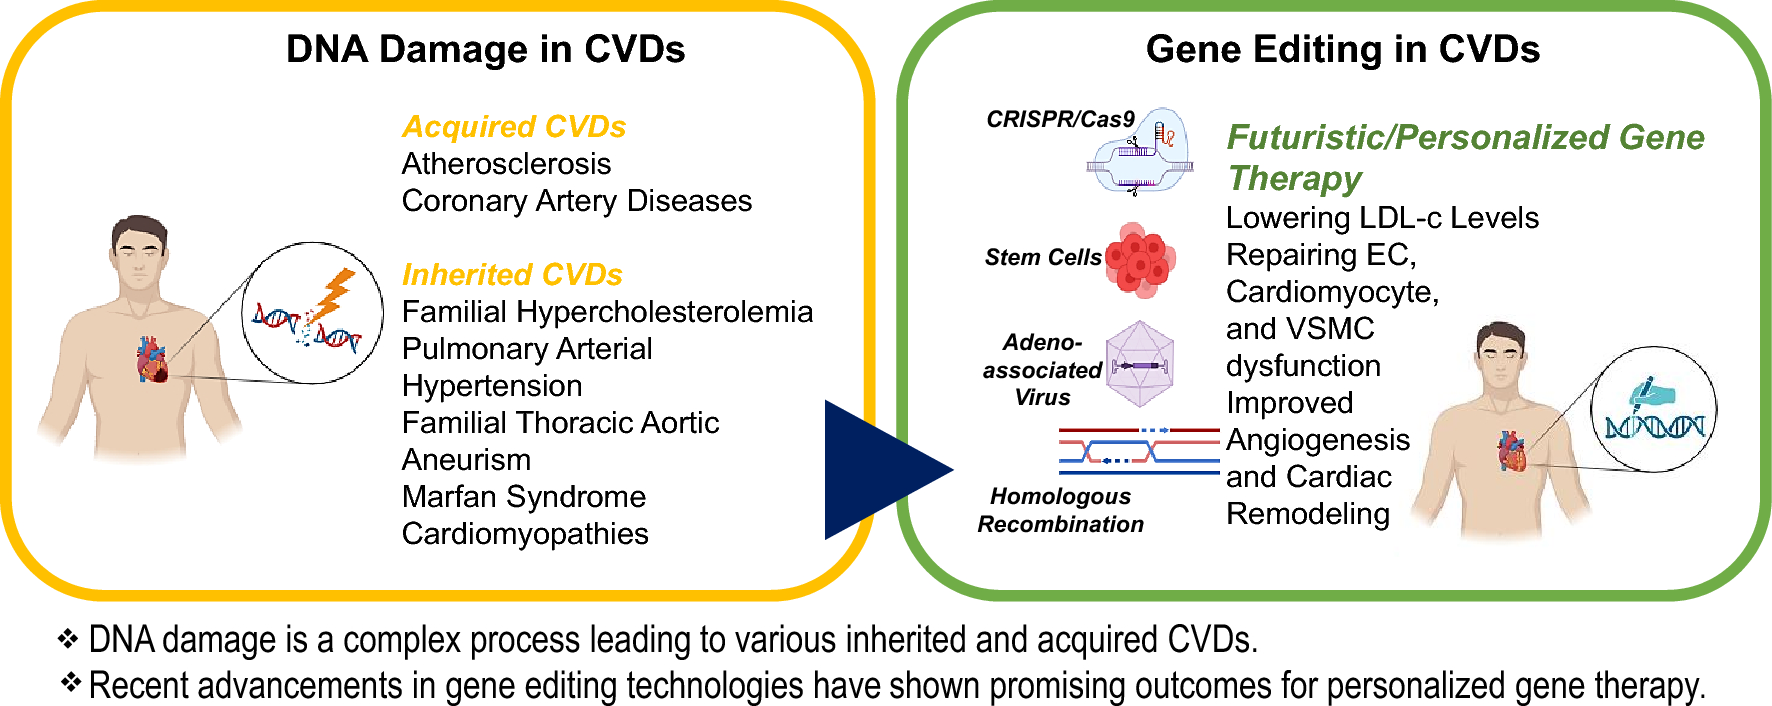 Gene editing and therapy in acquired and inherited cardiovascular disorders